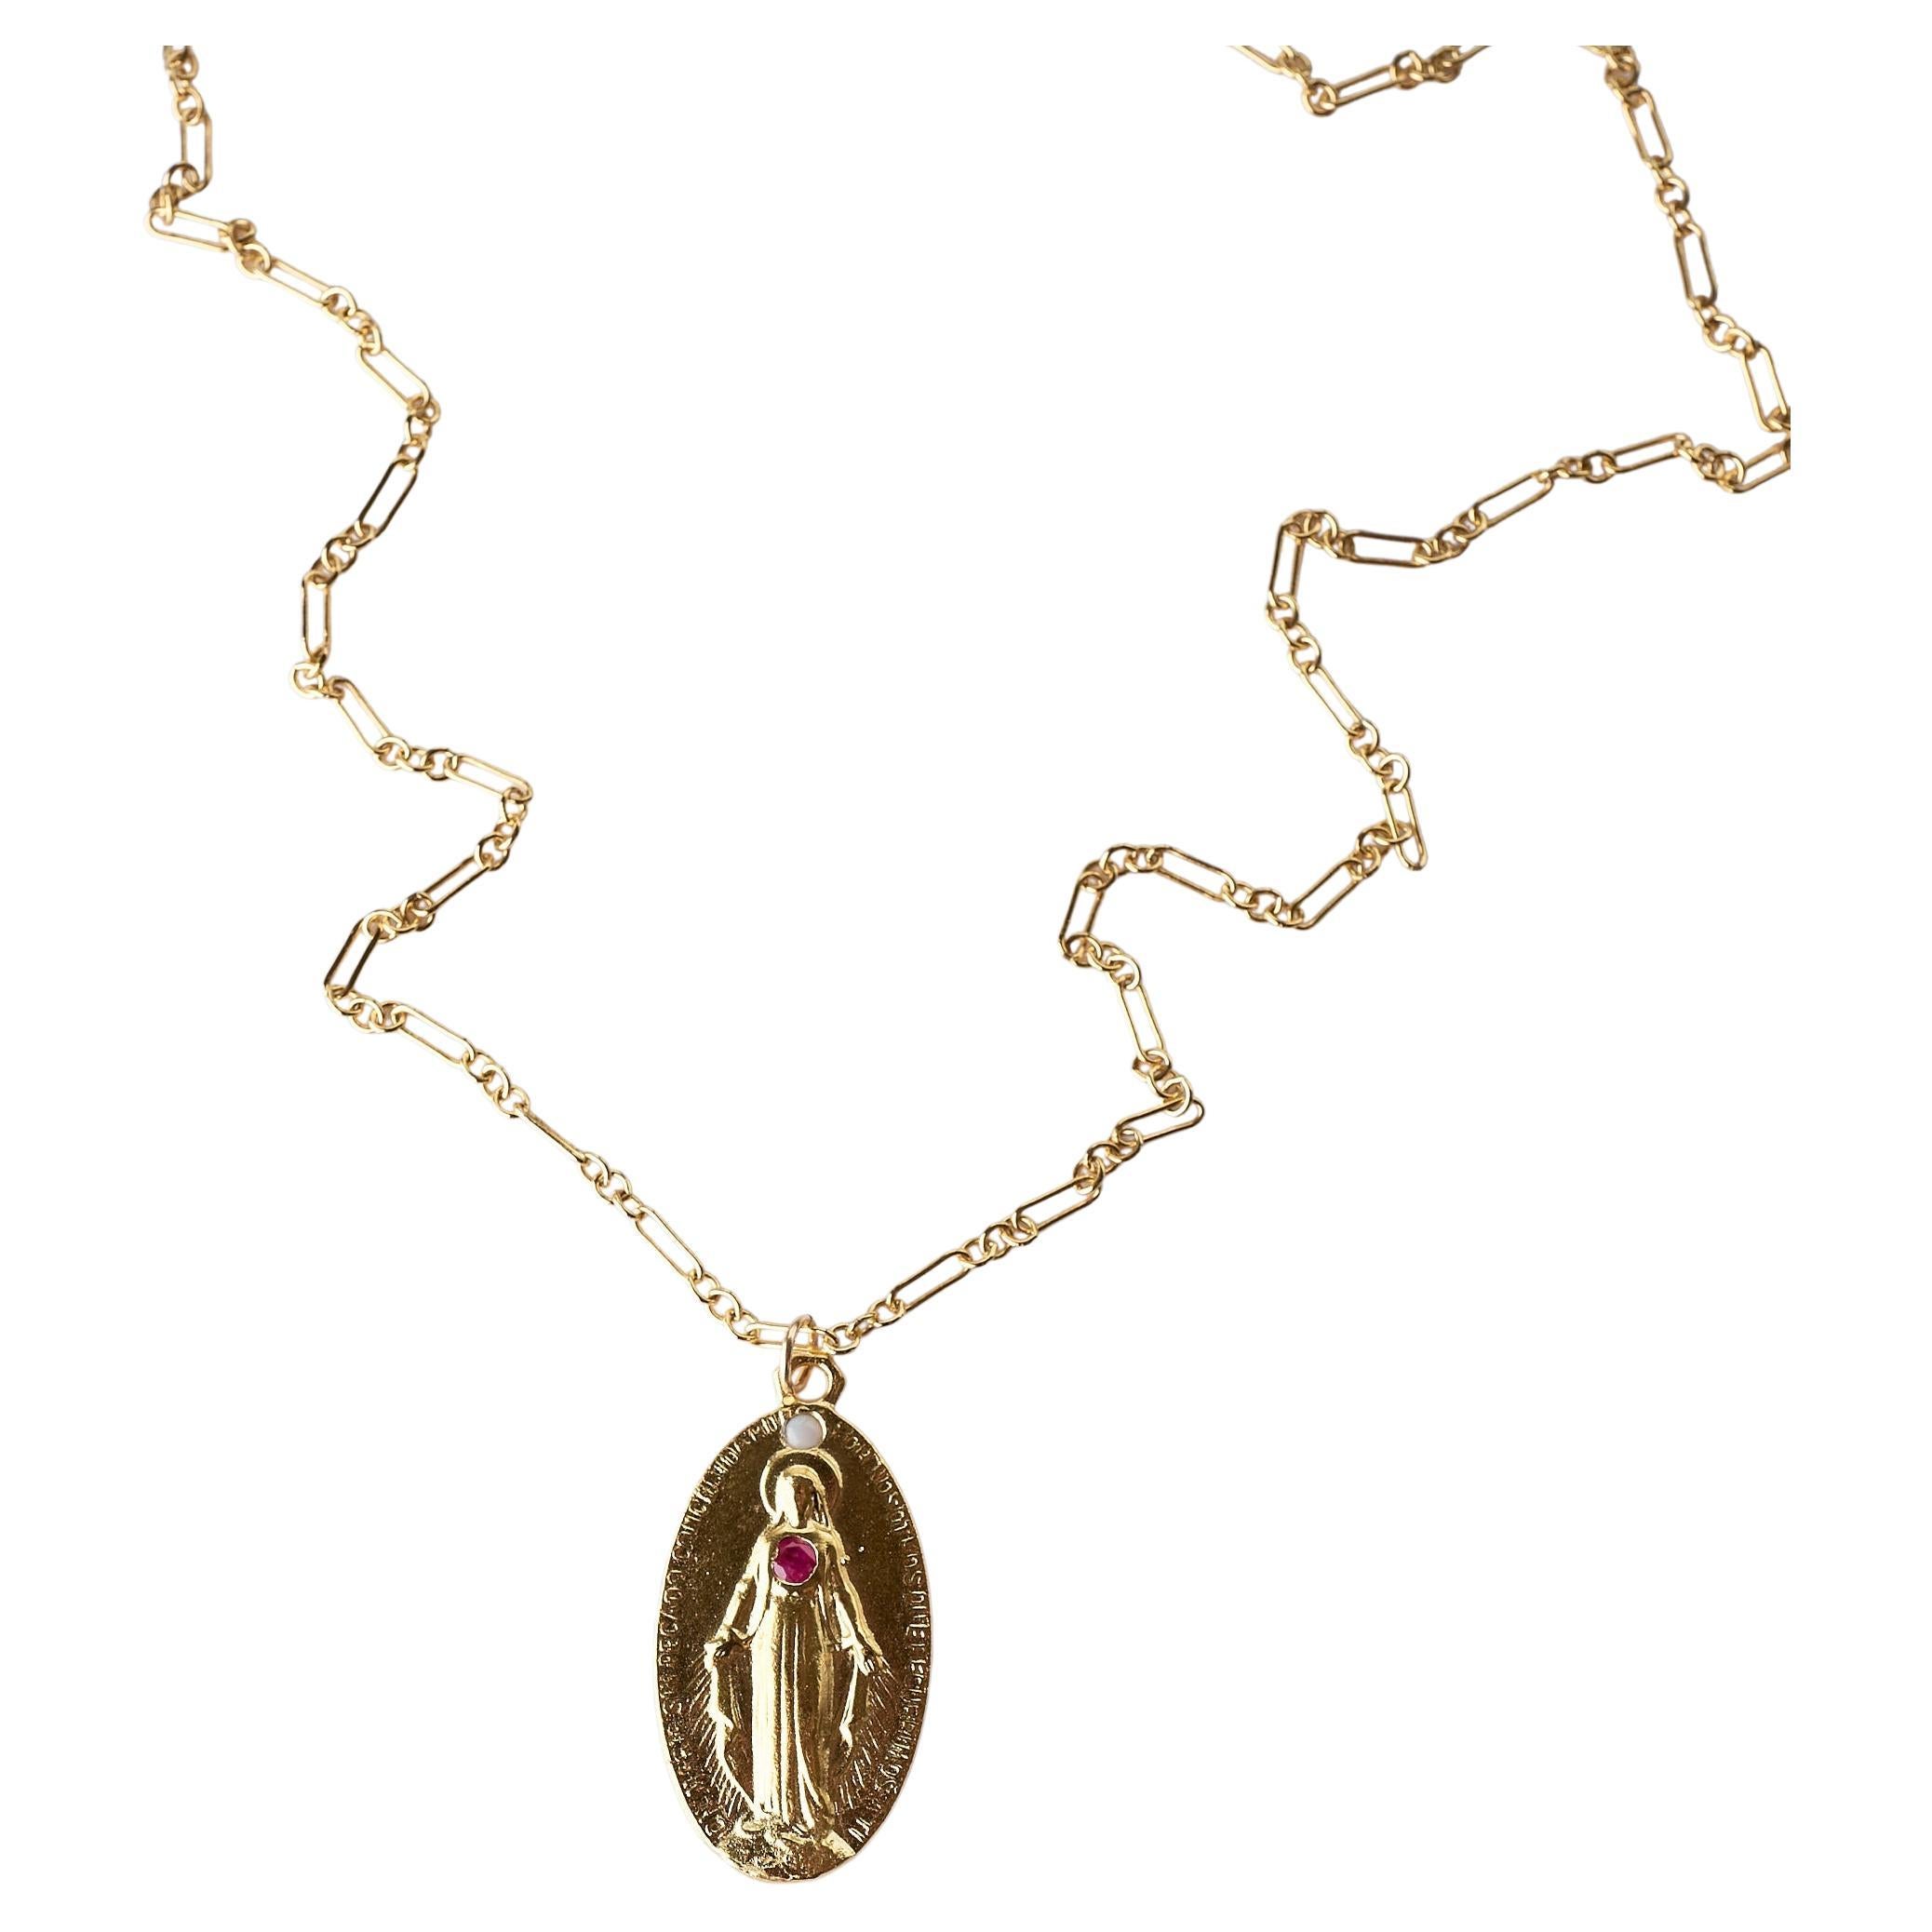 Virgin Mary Medal Chain Necklace Ruby Opal J Dauphin For Sale